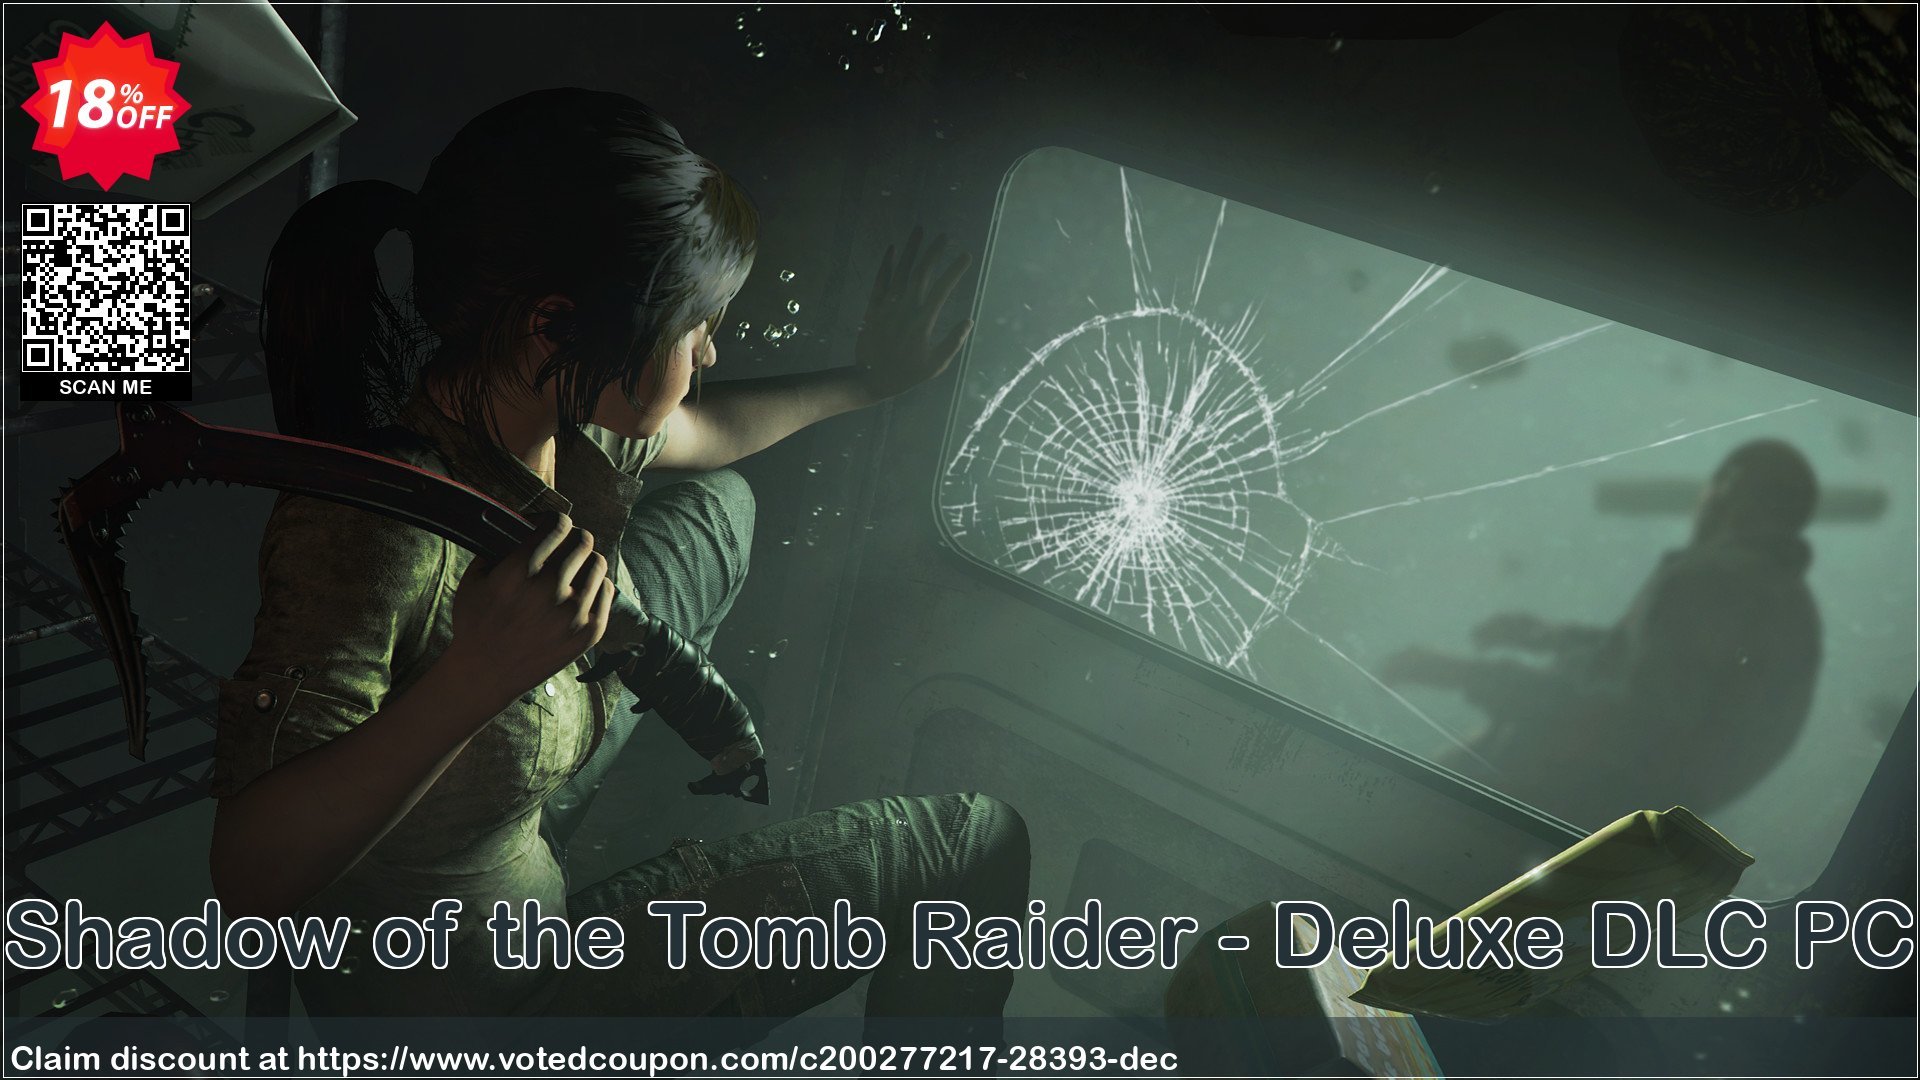 Shadow of the Tomb Raider - Deluxe DLC PC